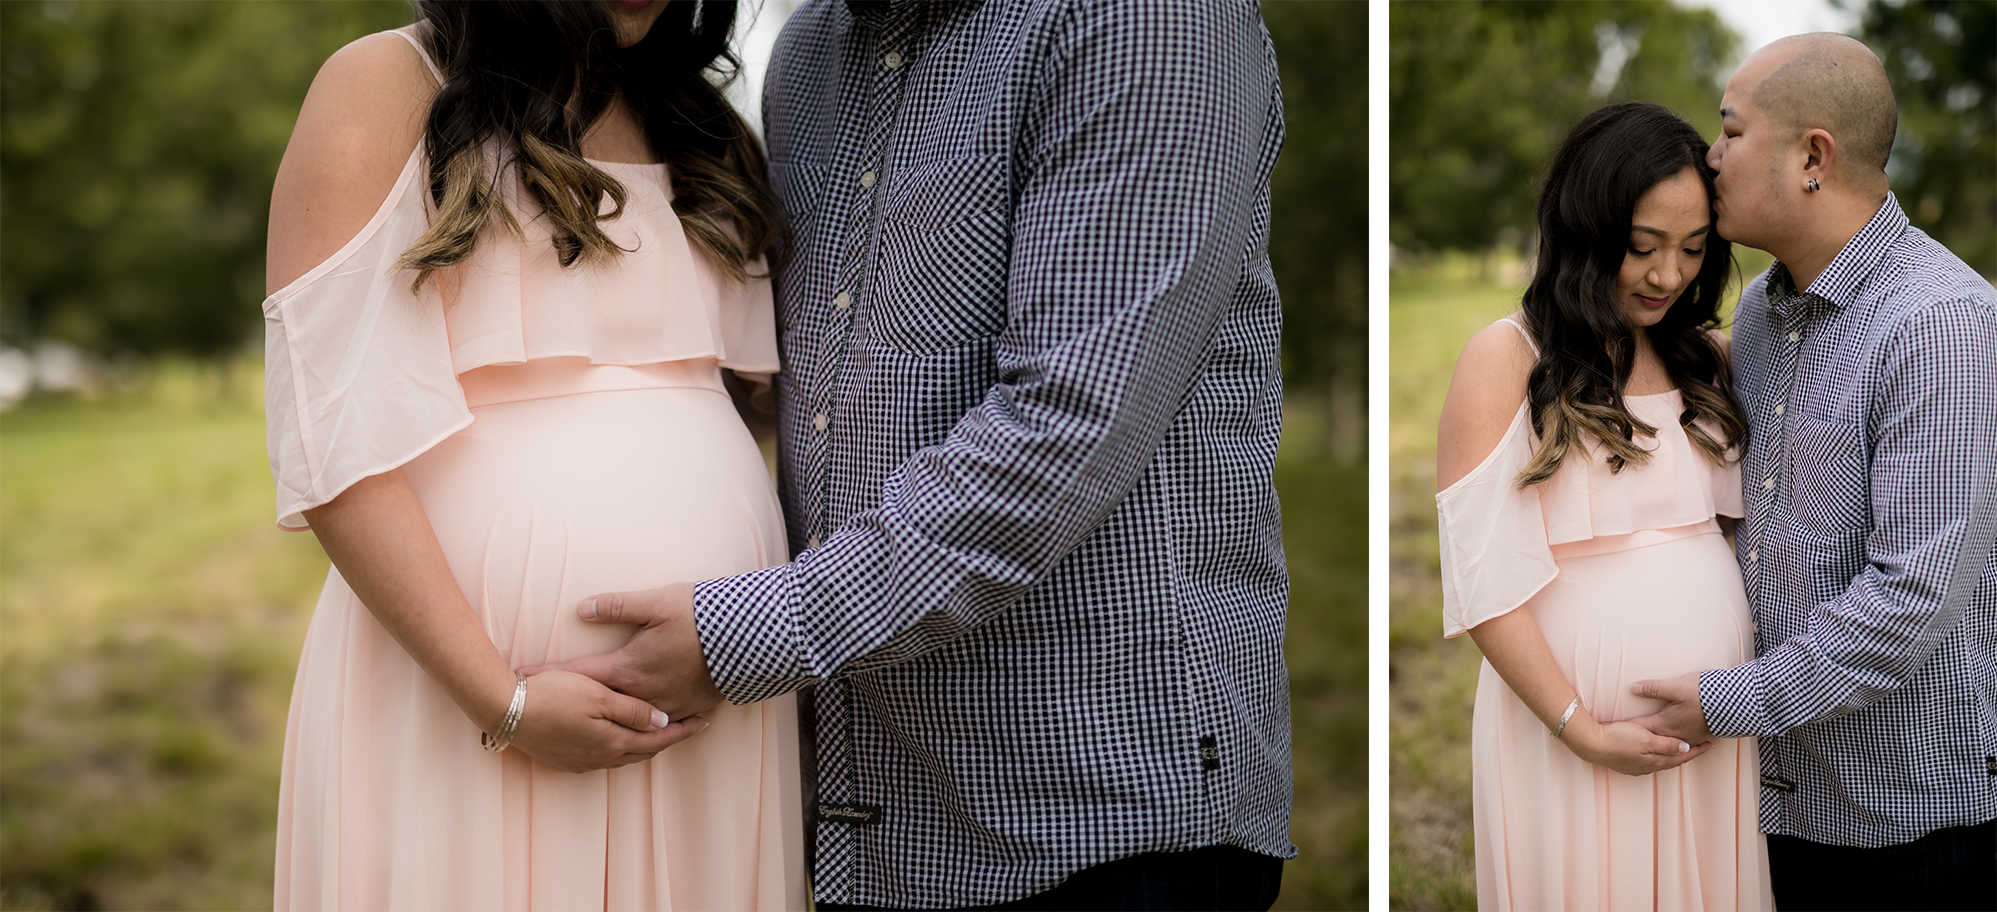 2-JC-Jeffrey-Open-Space-Trail-Maternity-Shoot-Andrew-Kwak-Photography.png